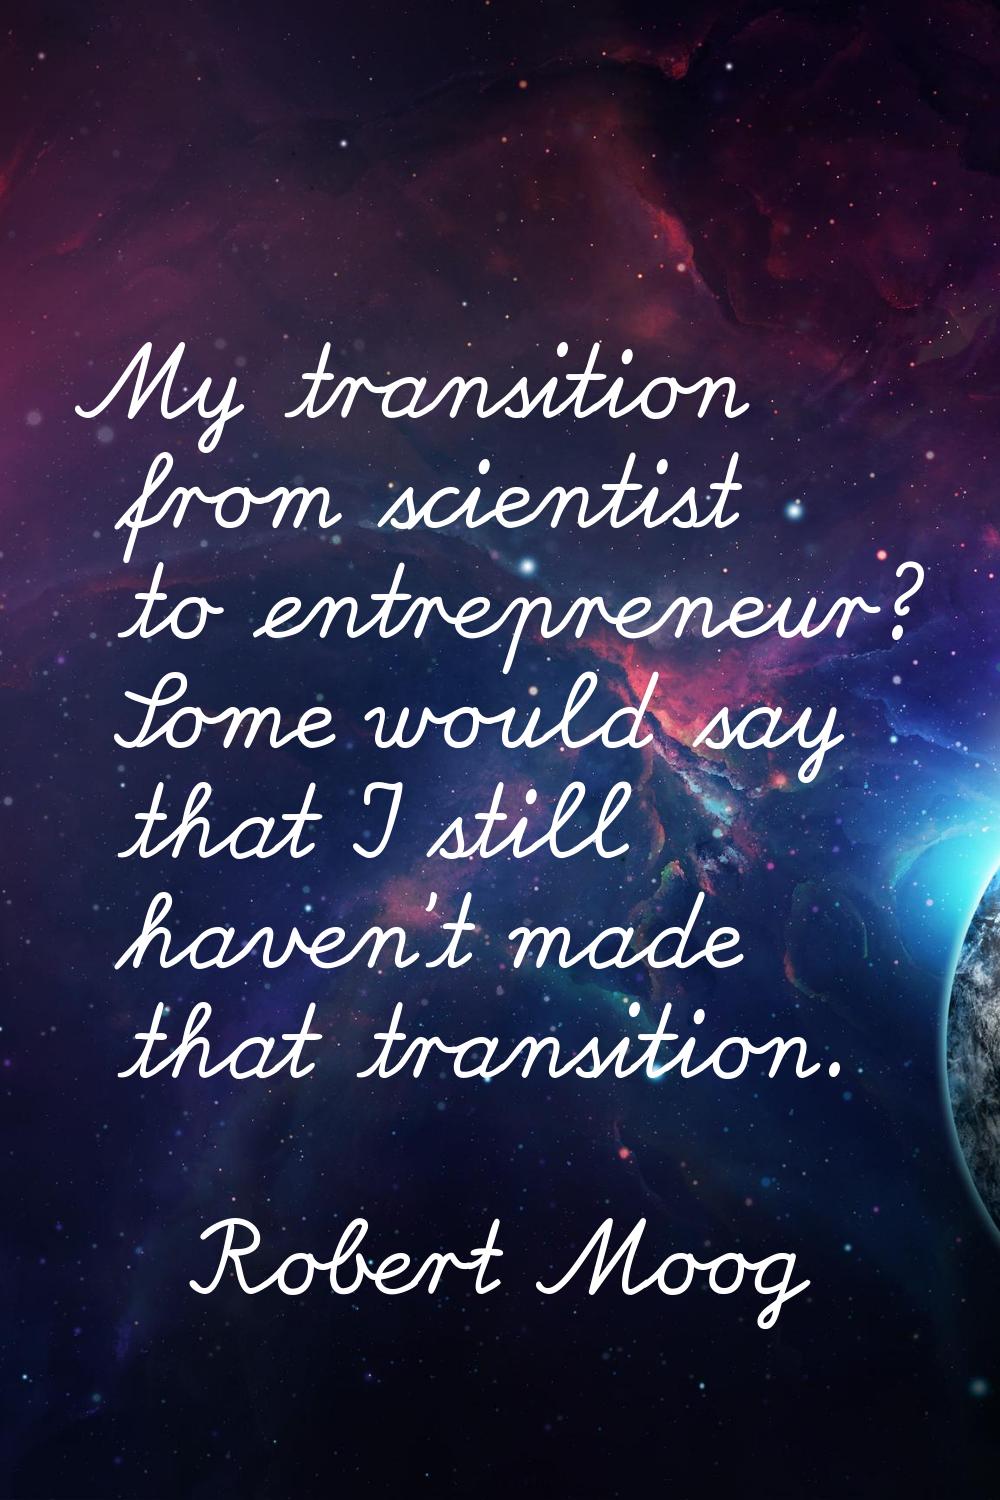 My transition from scientist to entrepreneur? Some would say that I still haven't made that transit